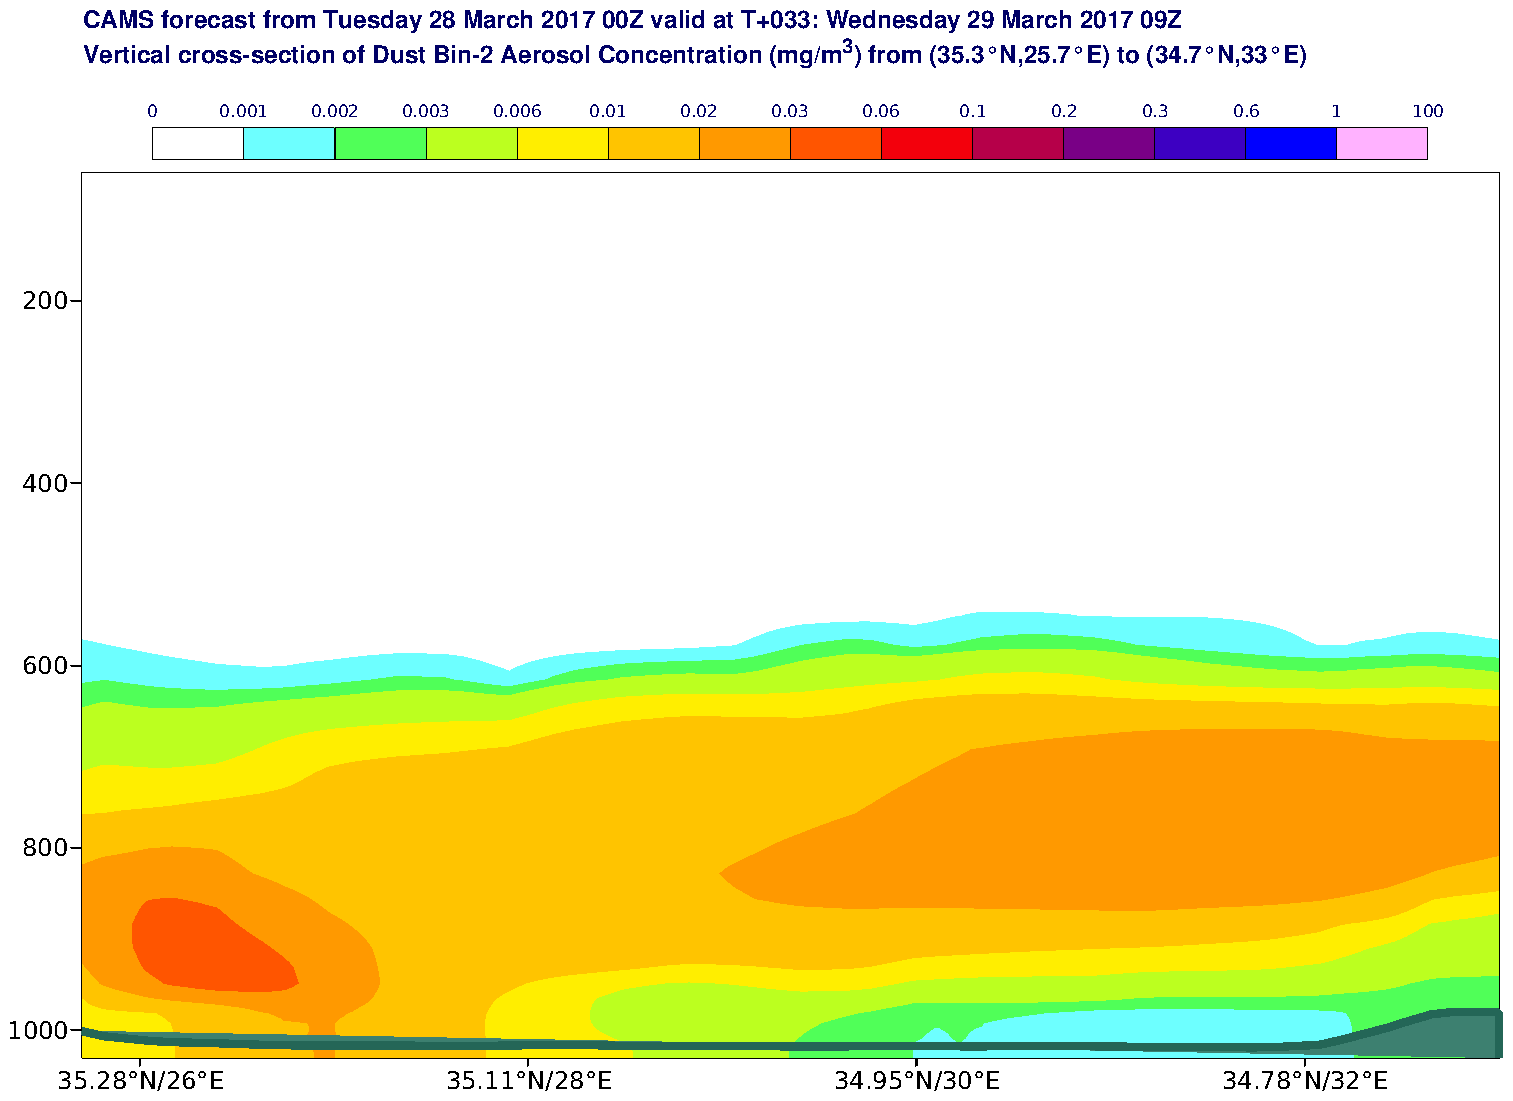 Vertical cross-section of Dust Bin-2 Aerosol Concentration (mg/m3) valid at T33 - 2017-03-29 09:00